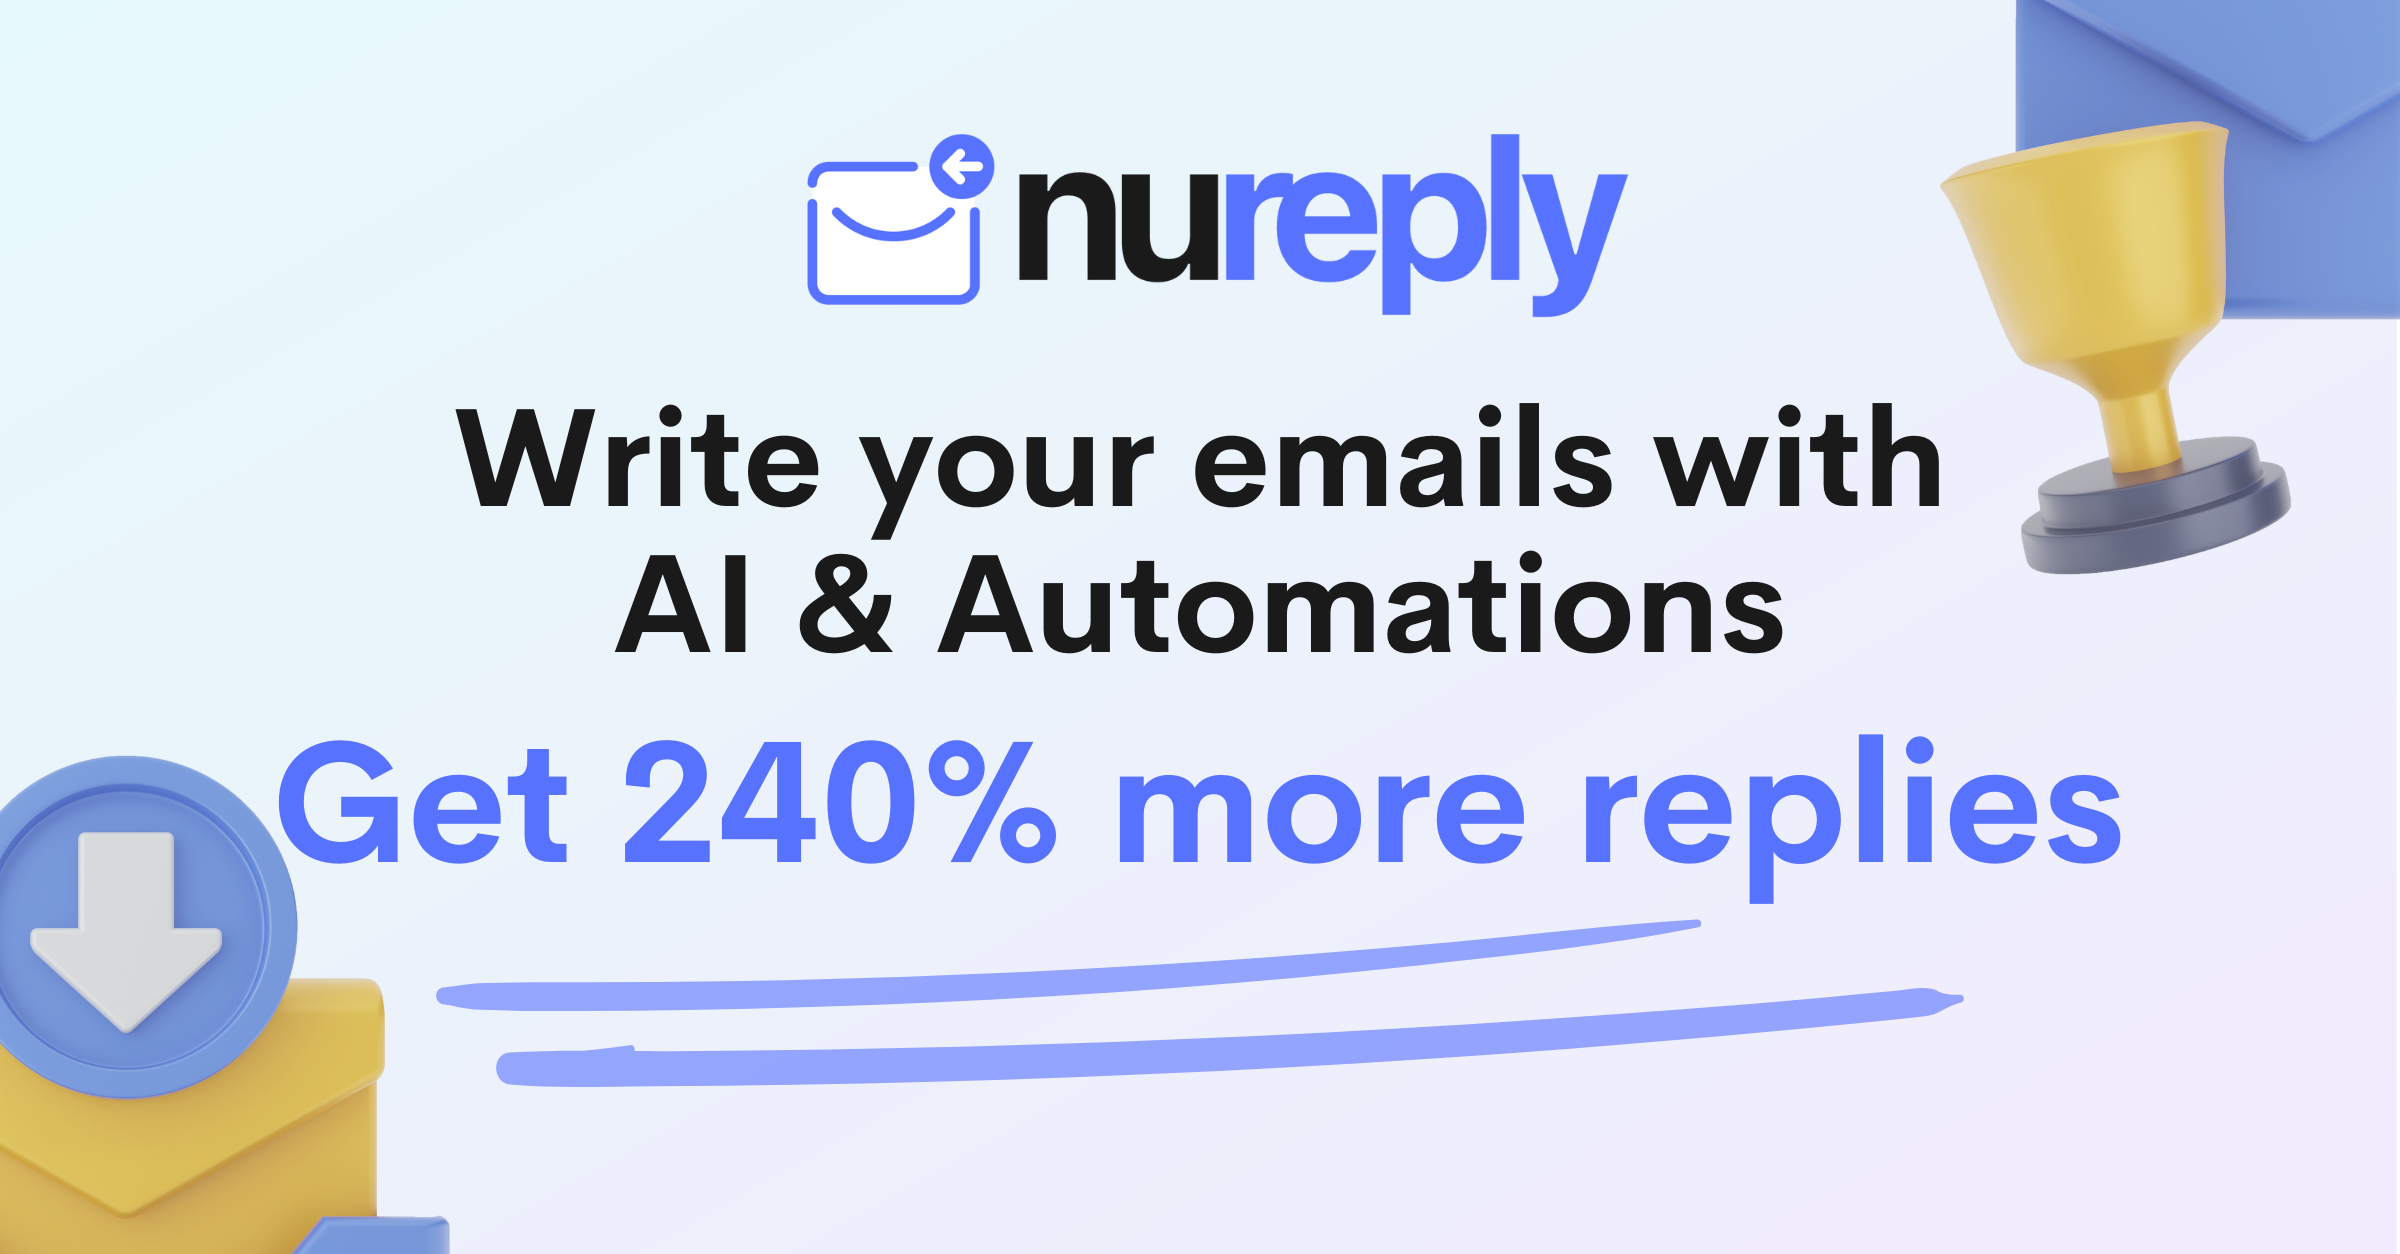 Nureply - A platform to automate cold email campaigns